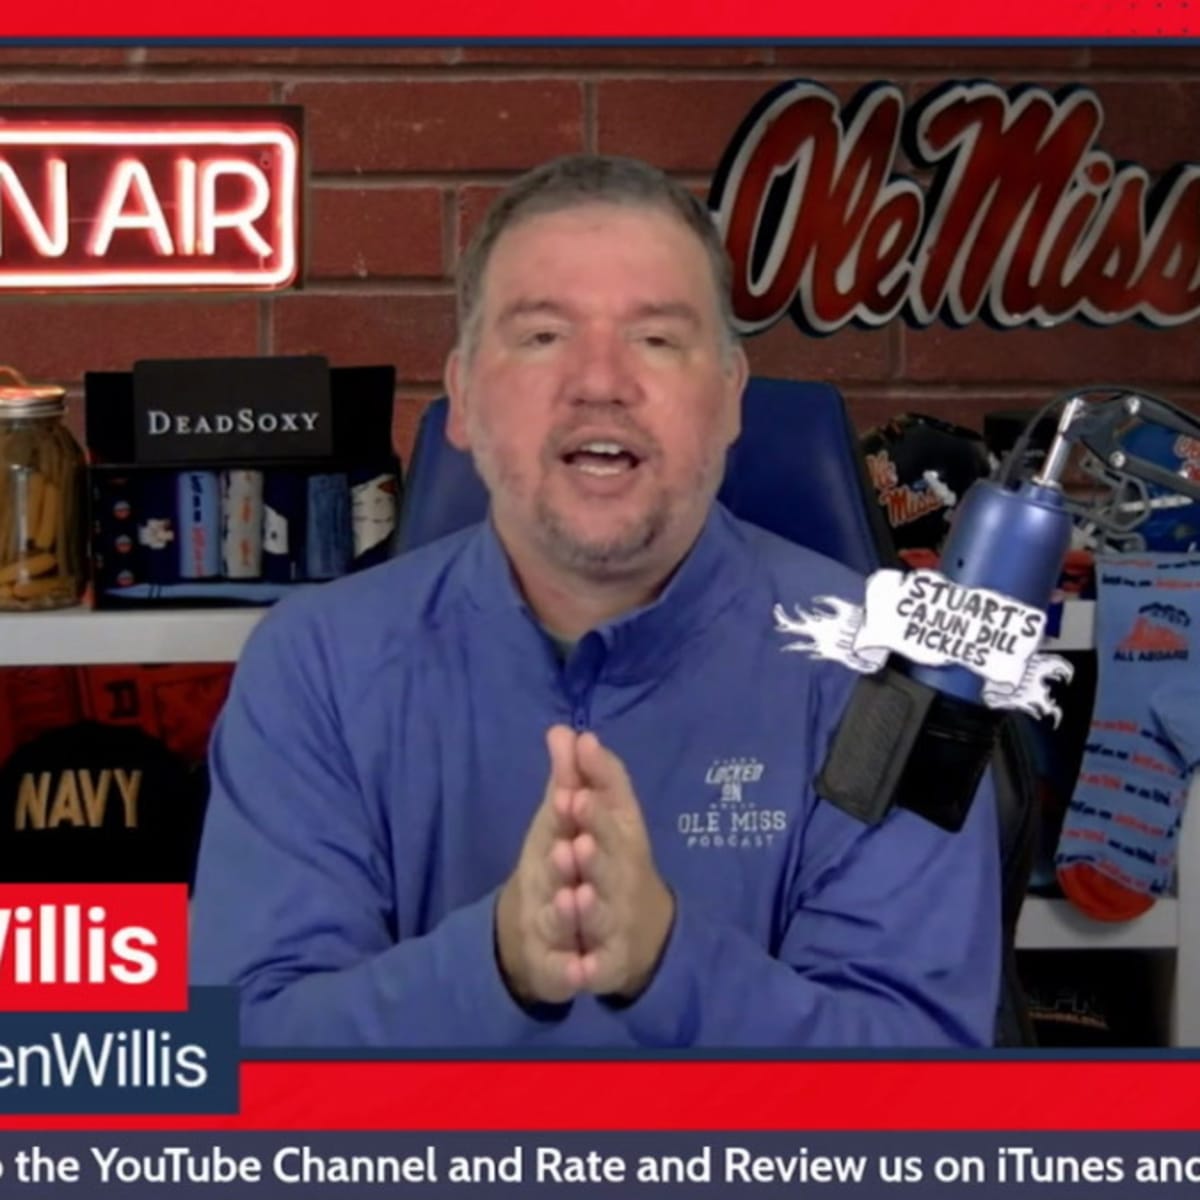 Is There A New Uniform Combination Coming For Ole Miss? - The Grove Report  – Sports Illustrated at Ole Miss